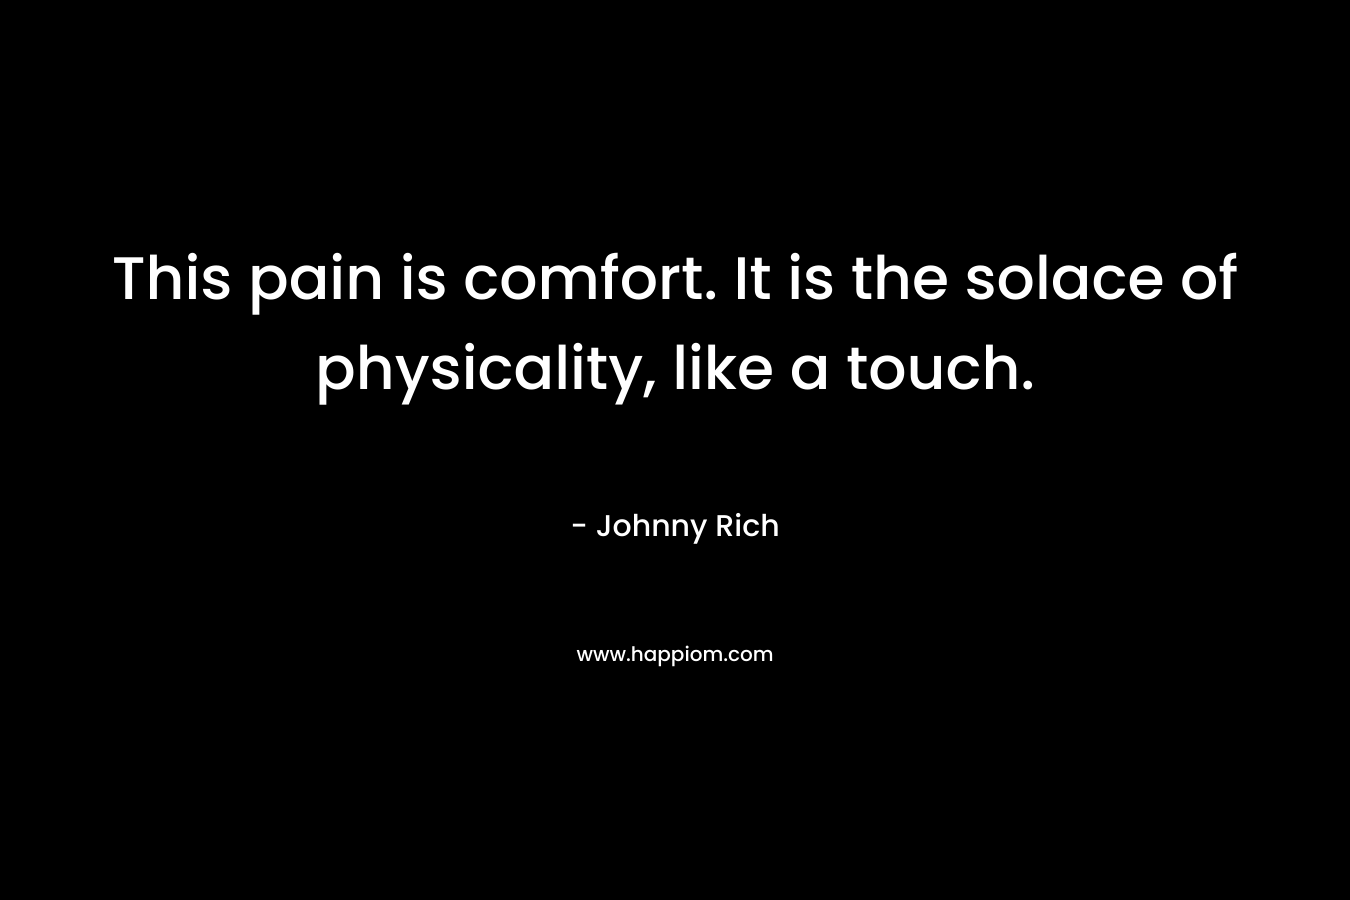 This pain is comfort. It is the solace of physicality, like a touch. – Johnny Rich